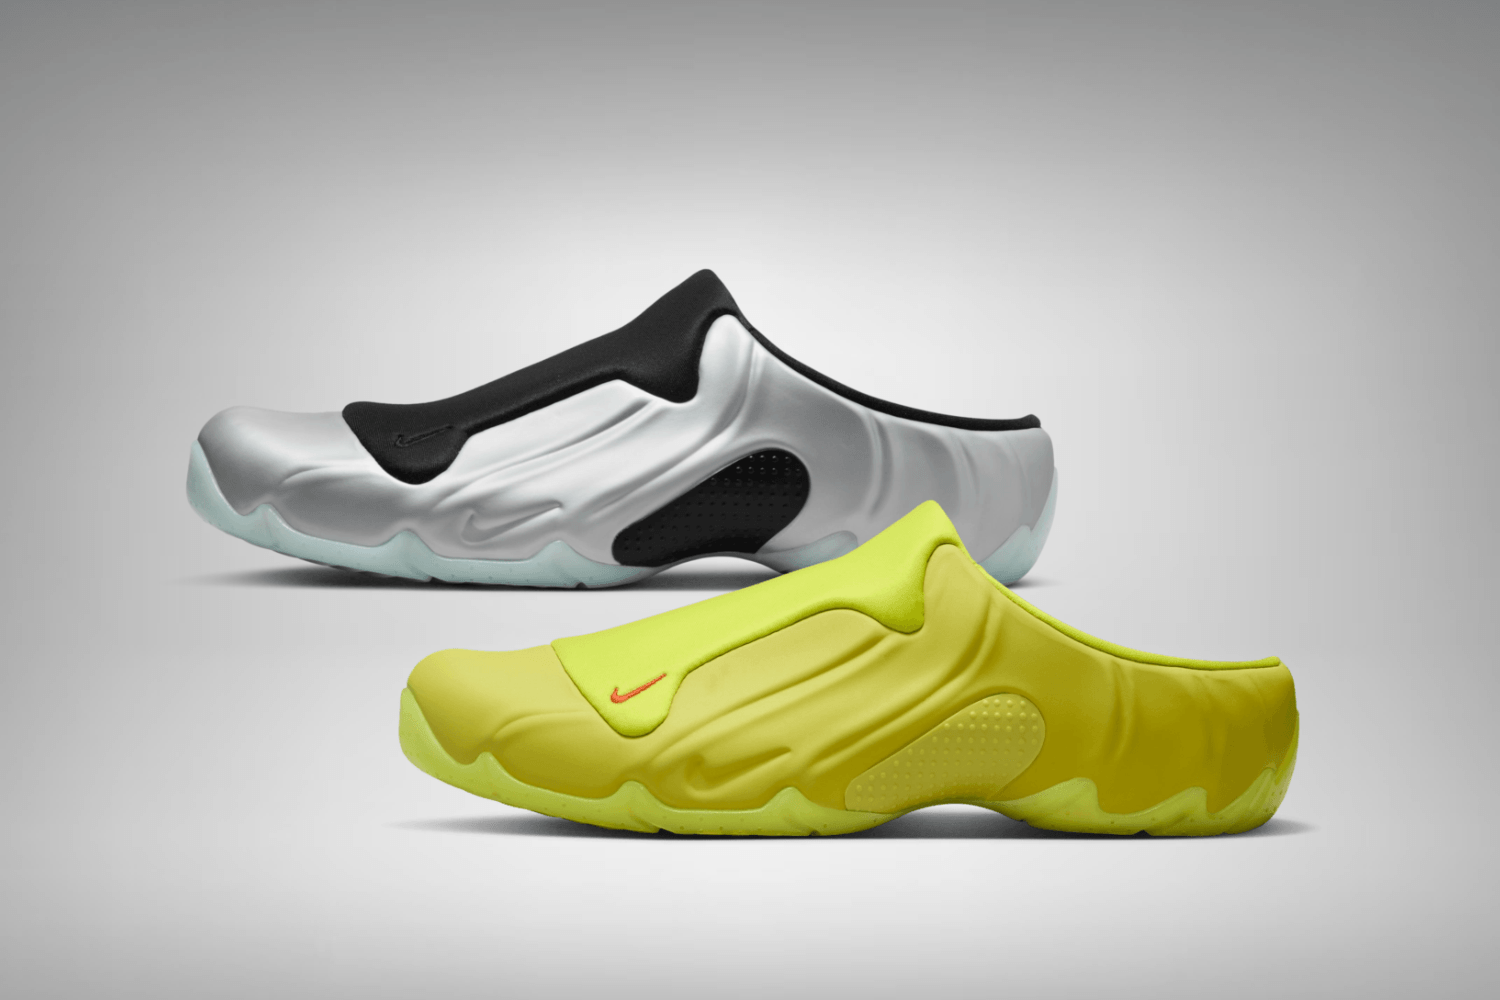 The Nike Clogposite makes its comeback in two colorways